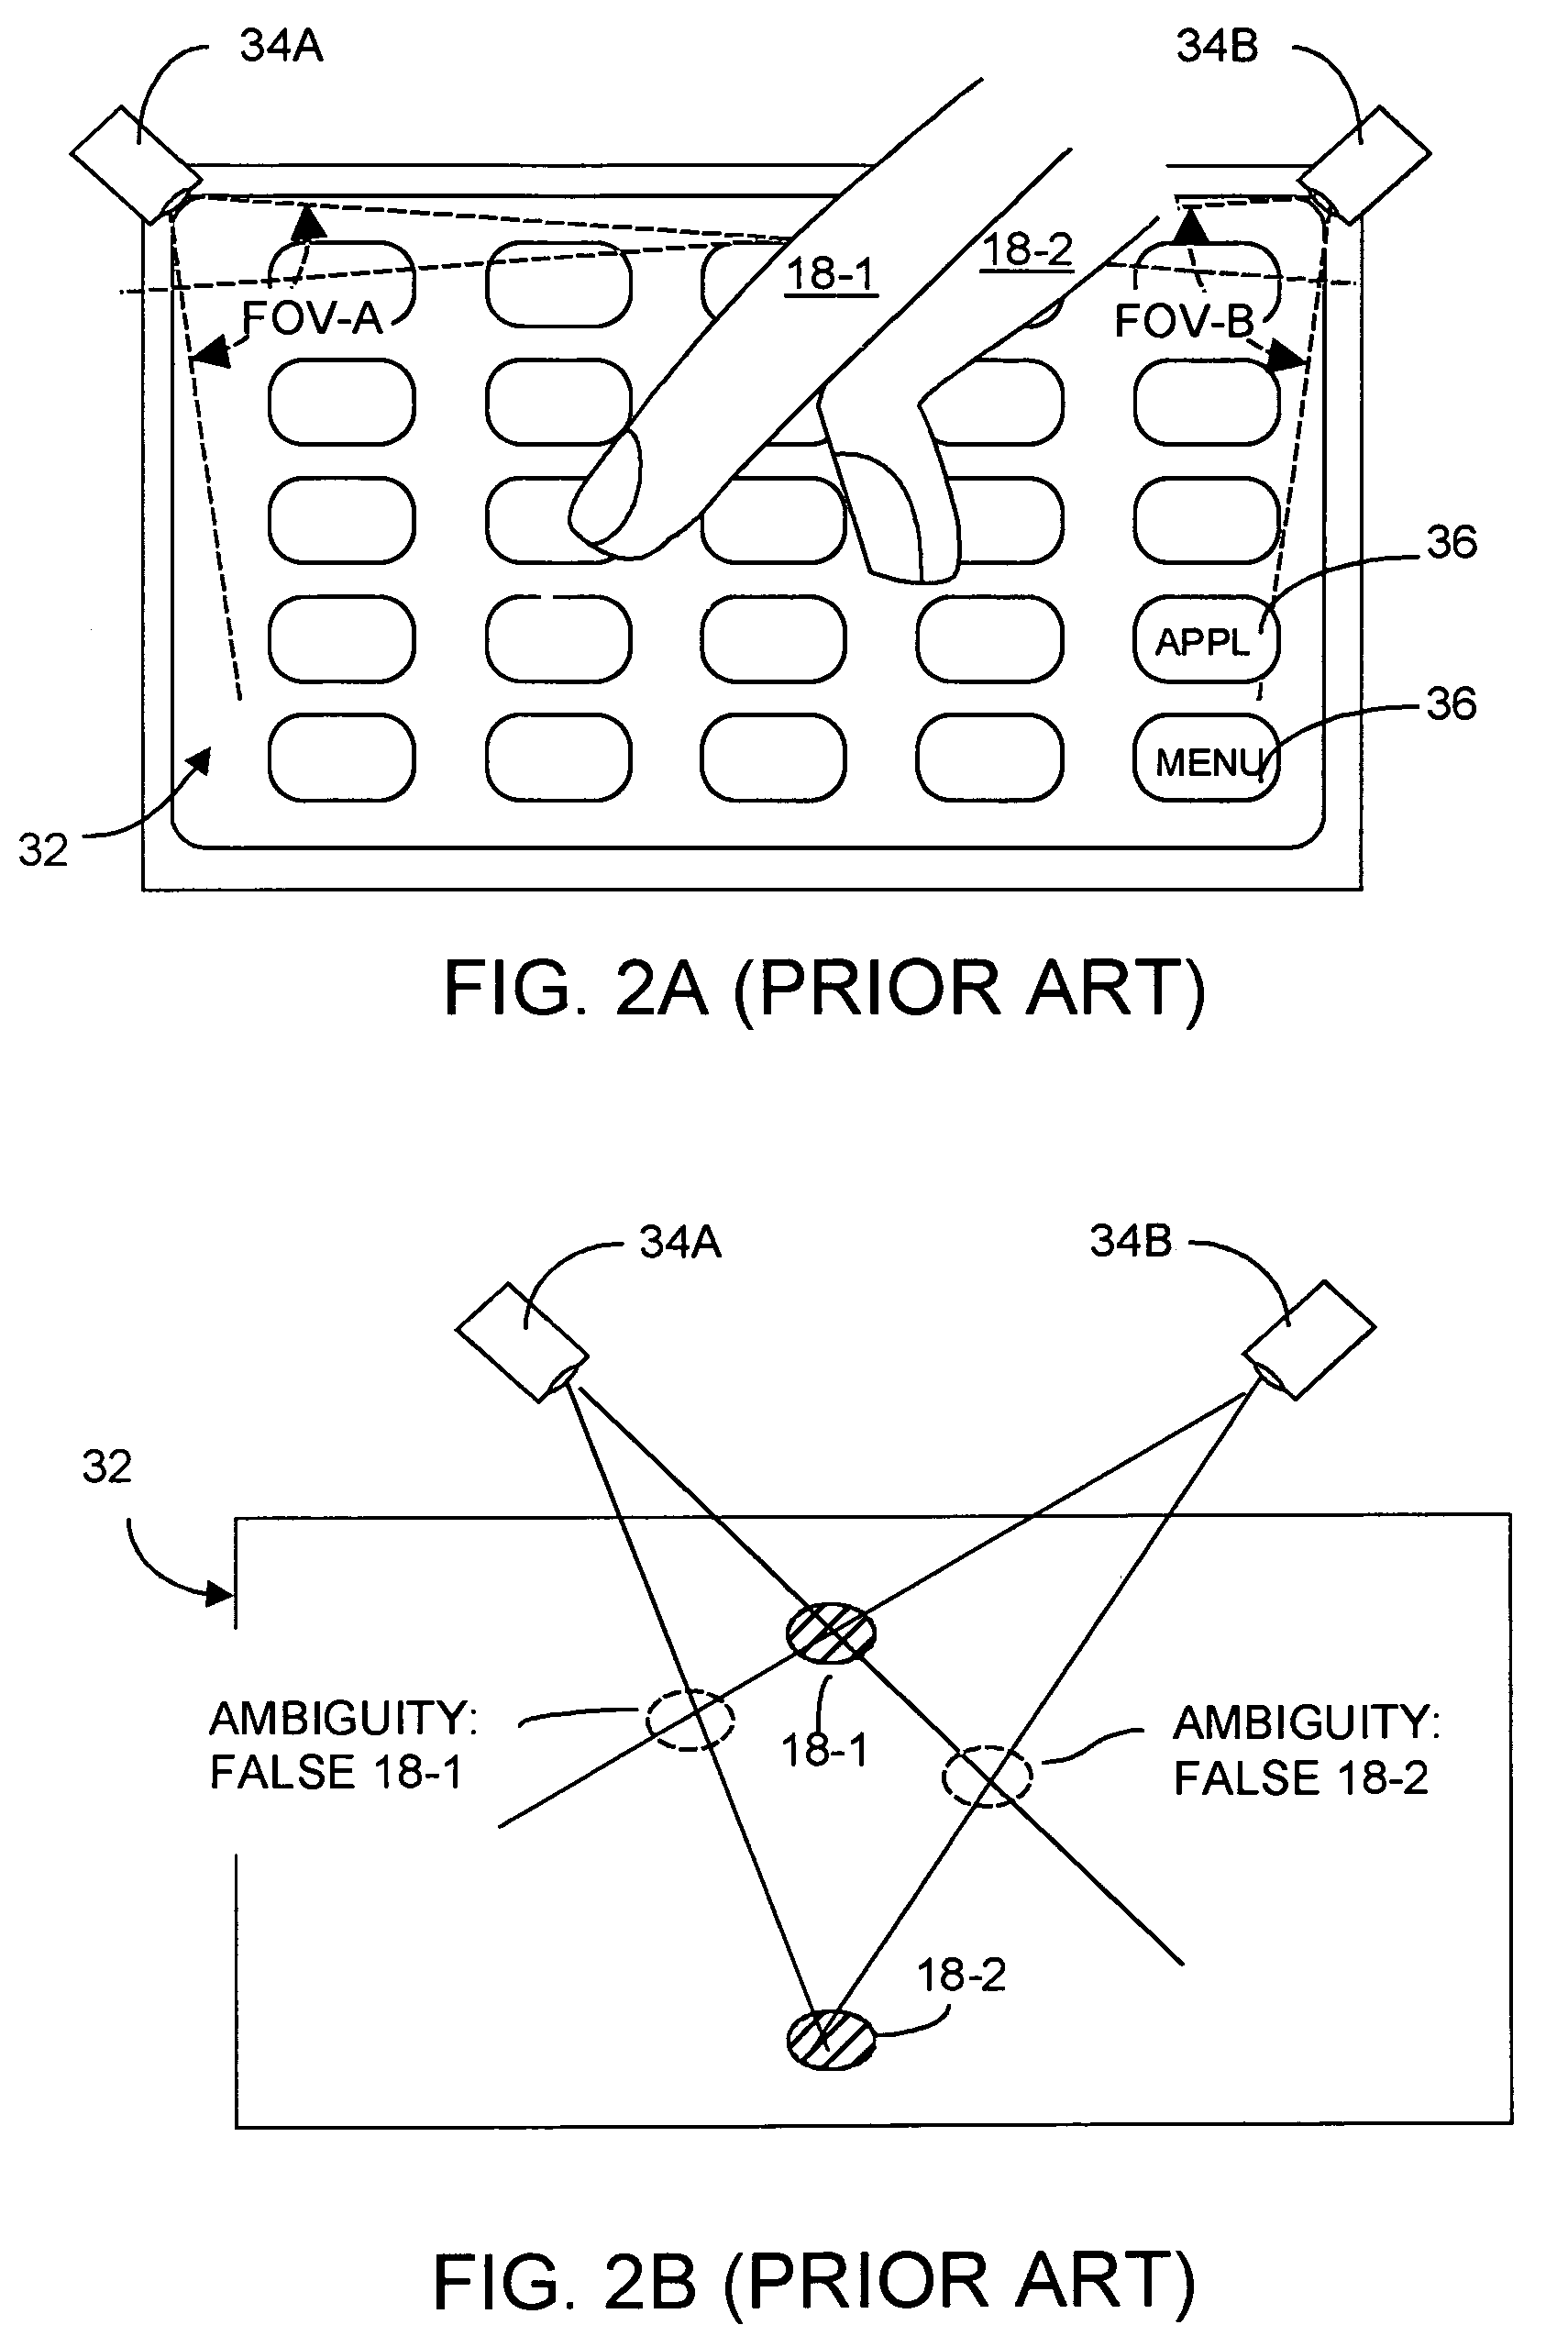 Method and system for recognition of user gesture interaction with passive surface video displays